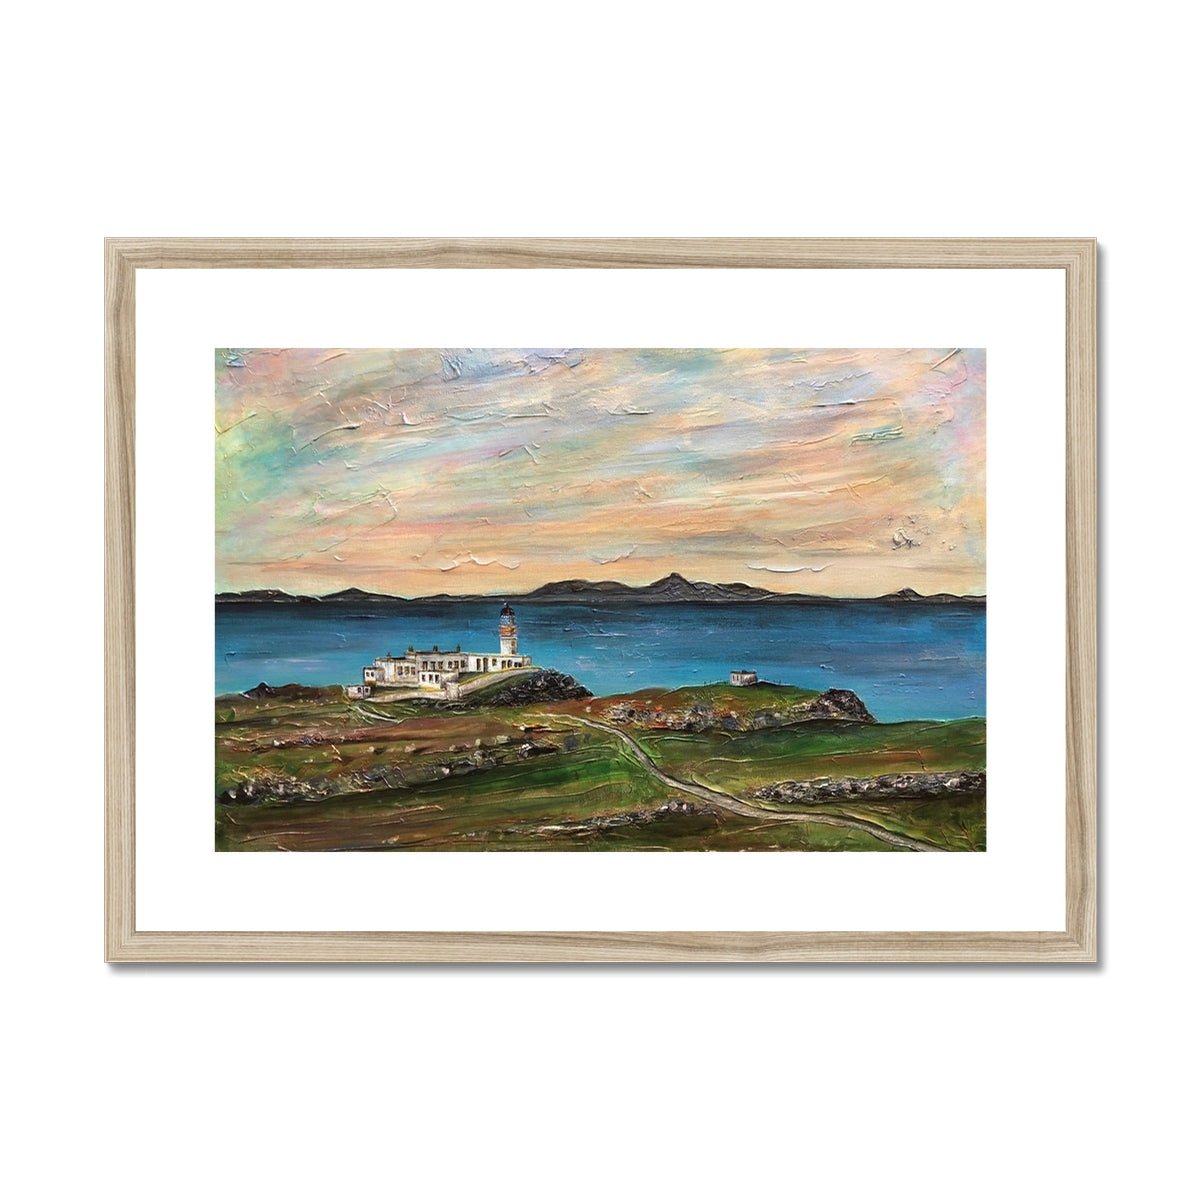 Neist Point Skye Painting | Framed & Mounted Prints From Scotland-Framed & Mounted Prints-Skye Art Gallery-A2 Landscape-Natural Frame-Paintings, Prints, Homeware, Art Gifts From Scotland By Scottish Artist Kevin Hunter